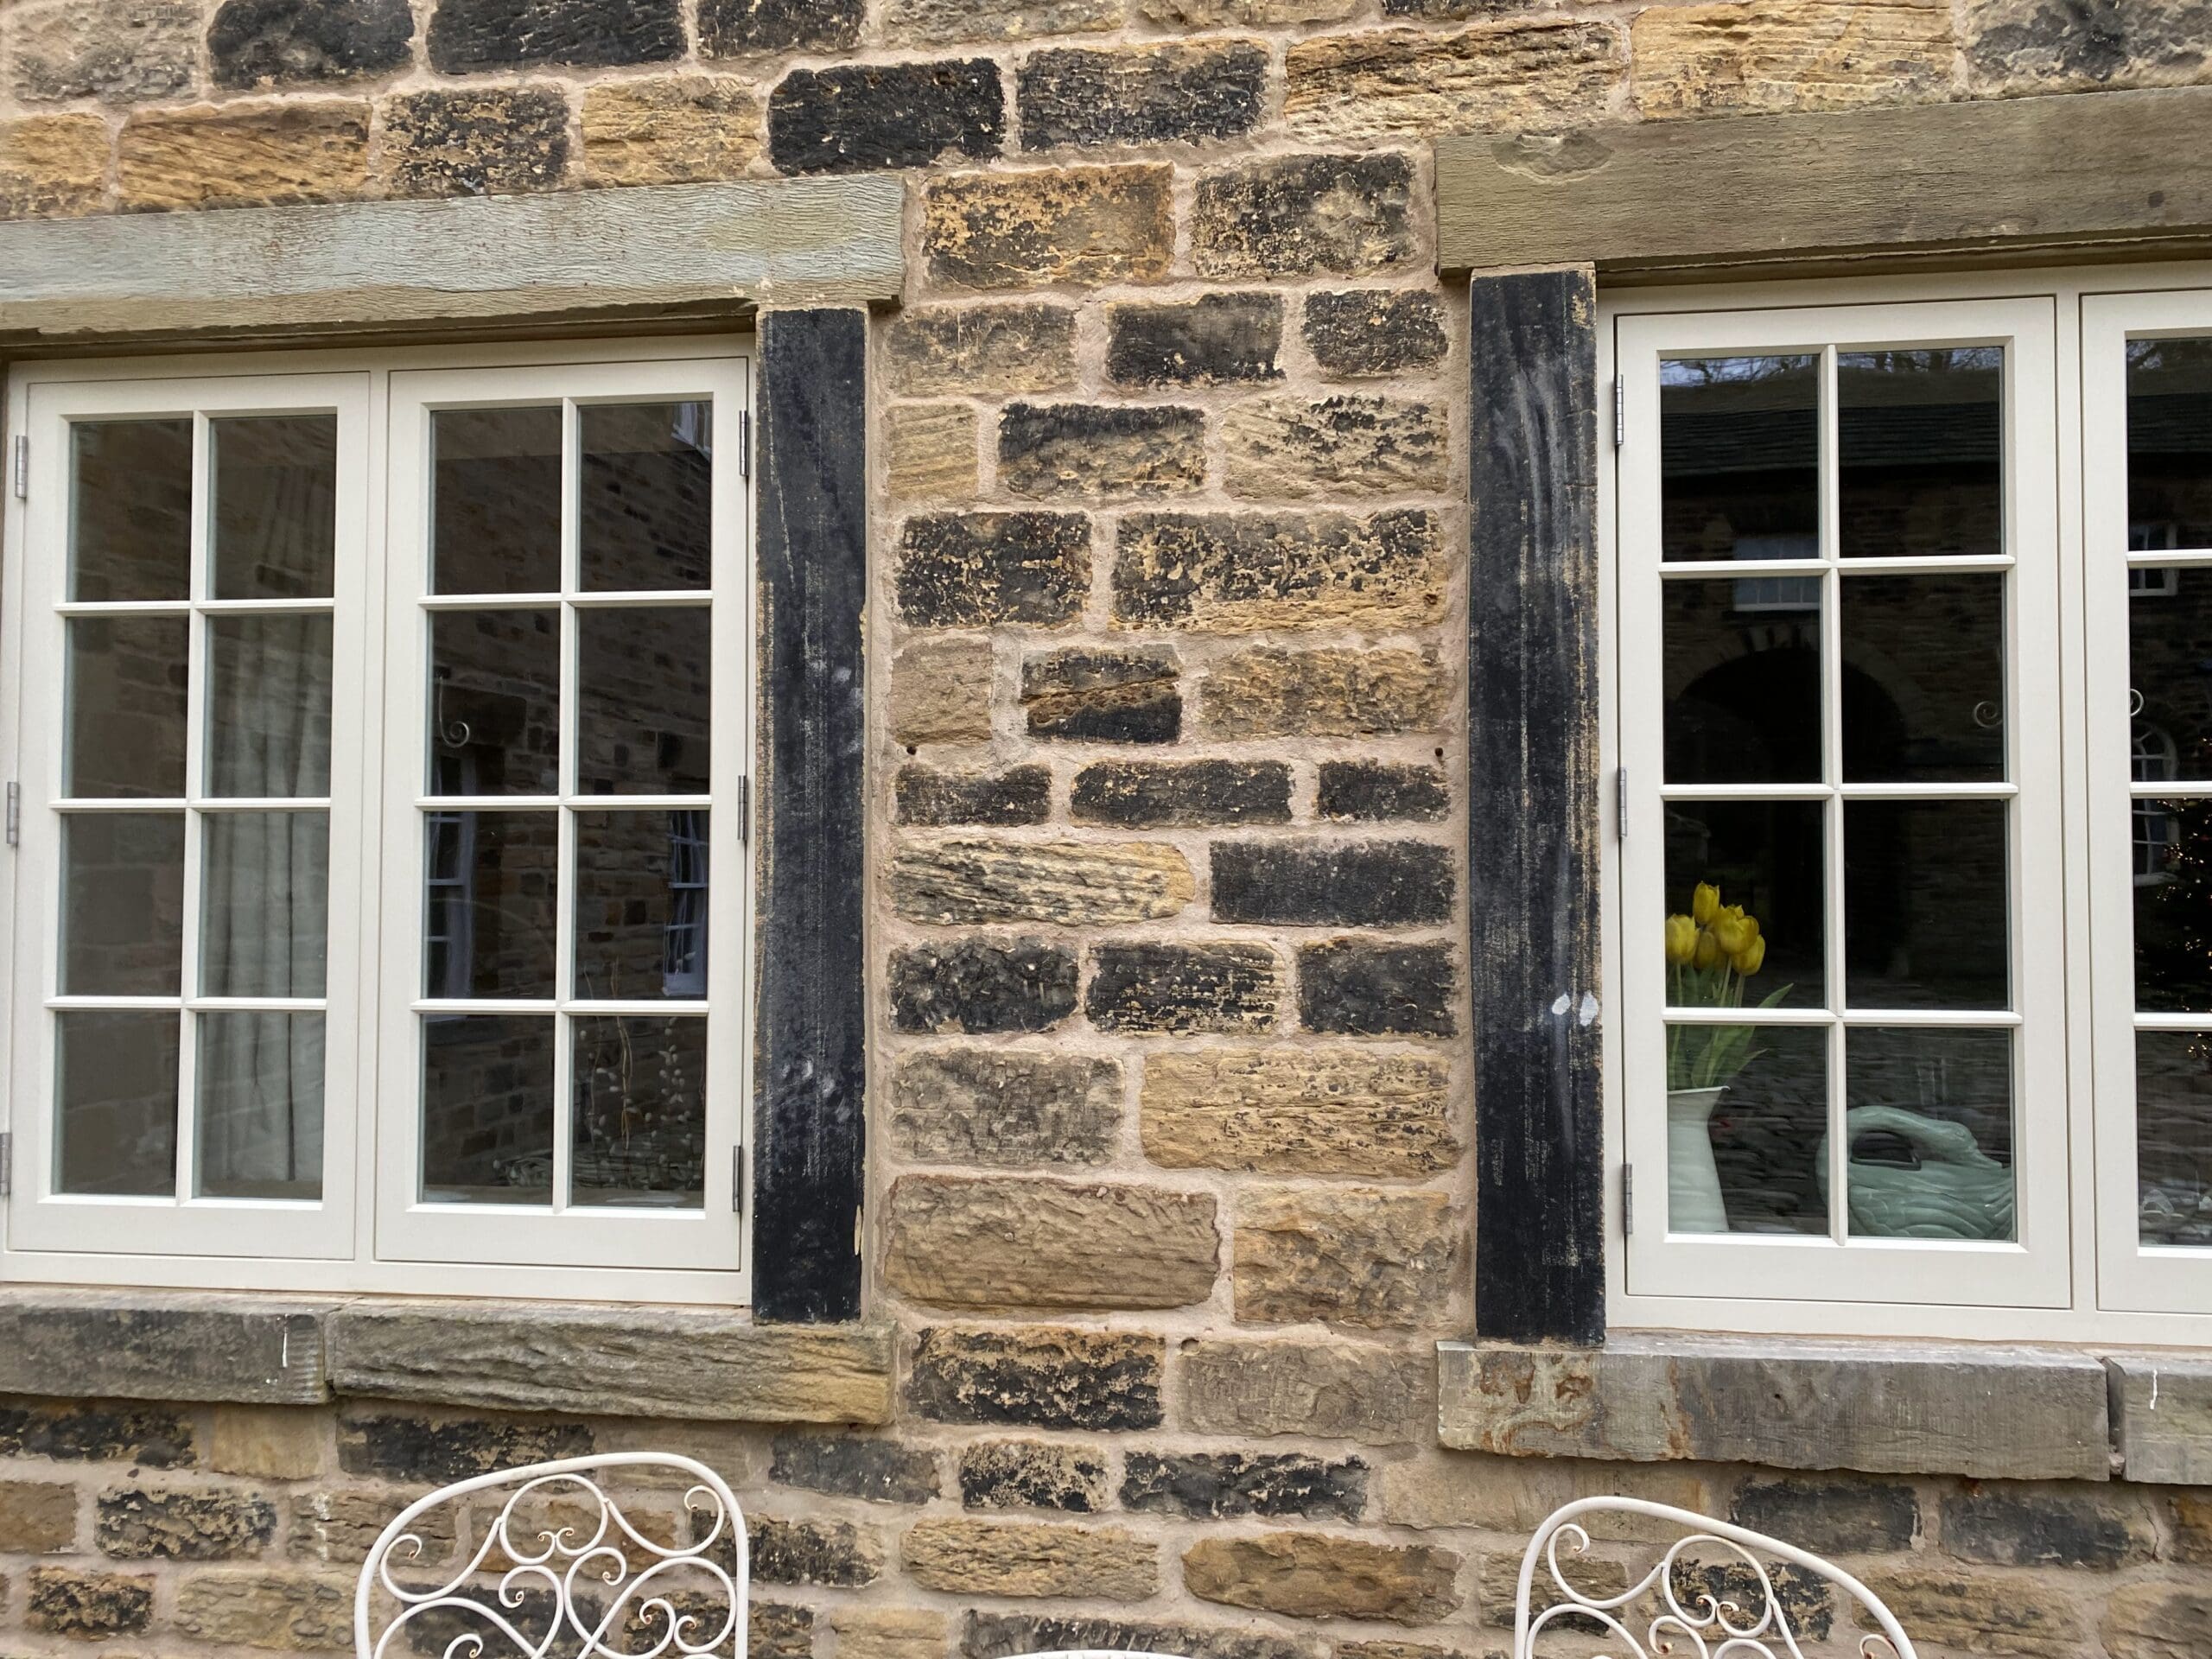 Vacuum glazing in a heritage style window